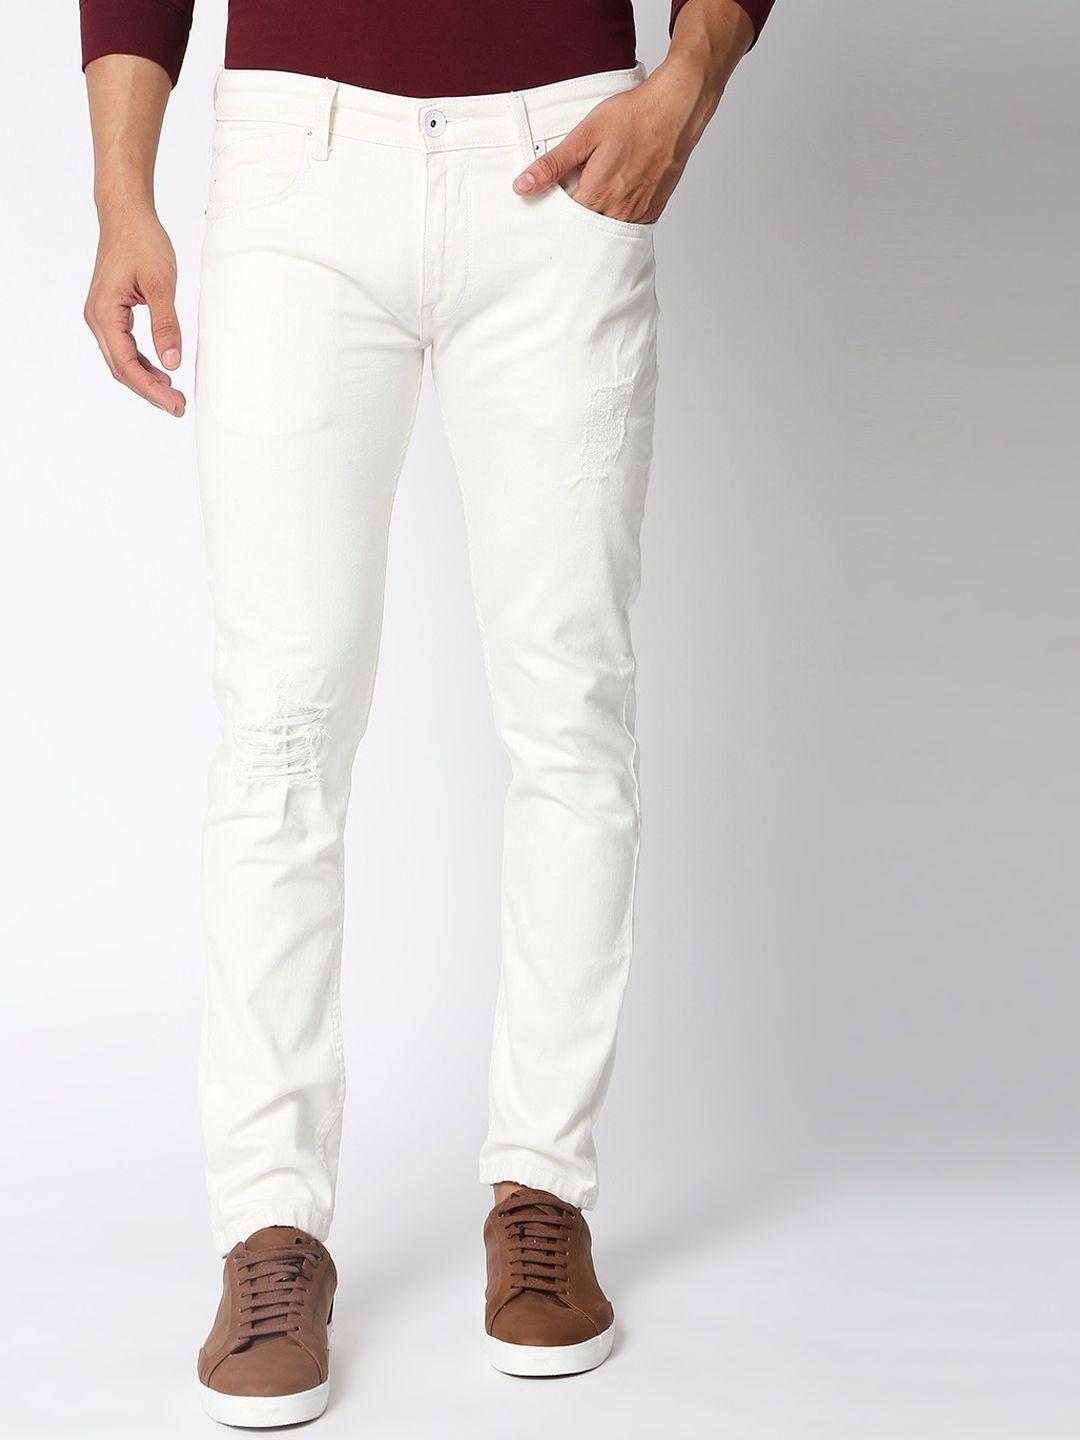 pepe-jeans-men-white-solid-cotton-tapered-fit-low-rise-stretchable-jeans